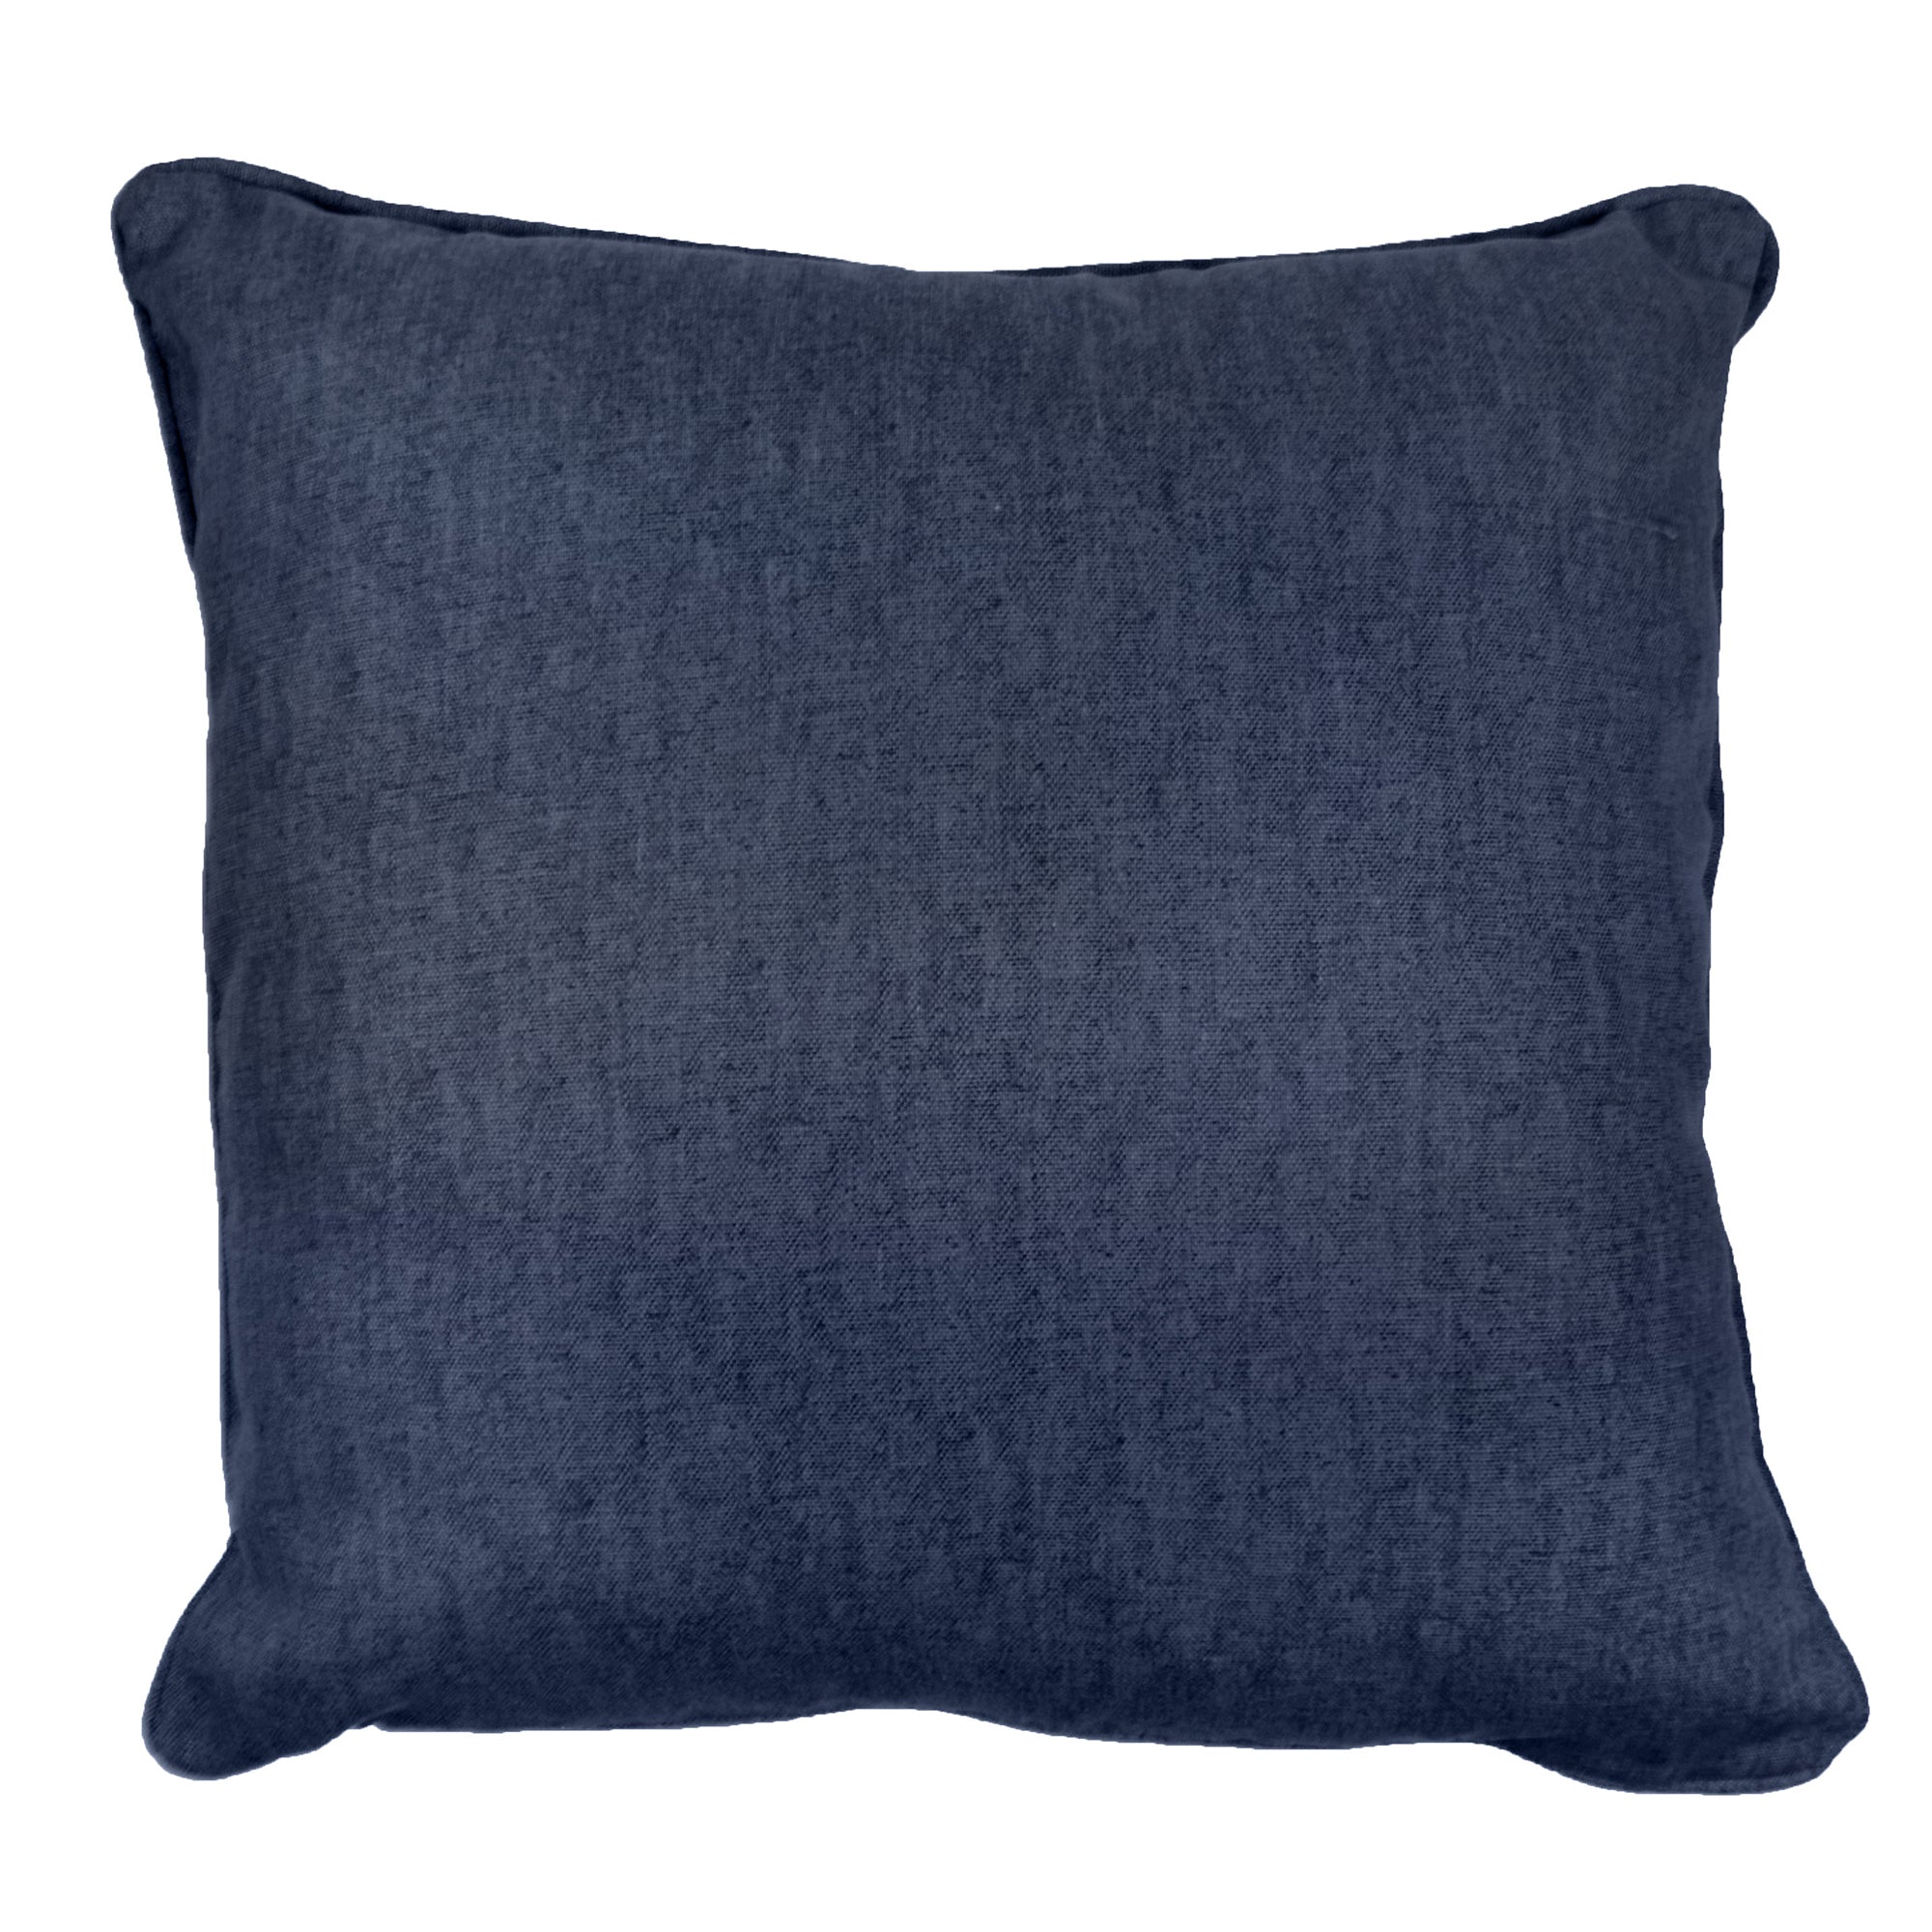 Sorbonne - 100% Cotton Filled Cushion in Navy - by Fusion